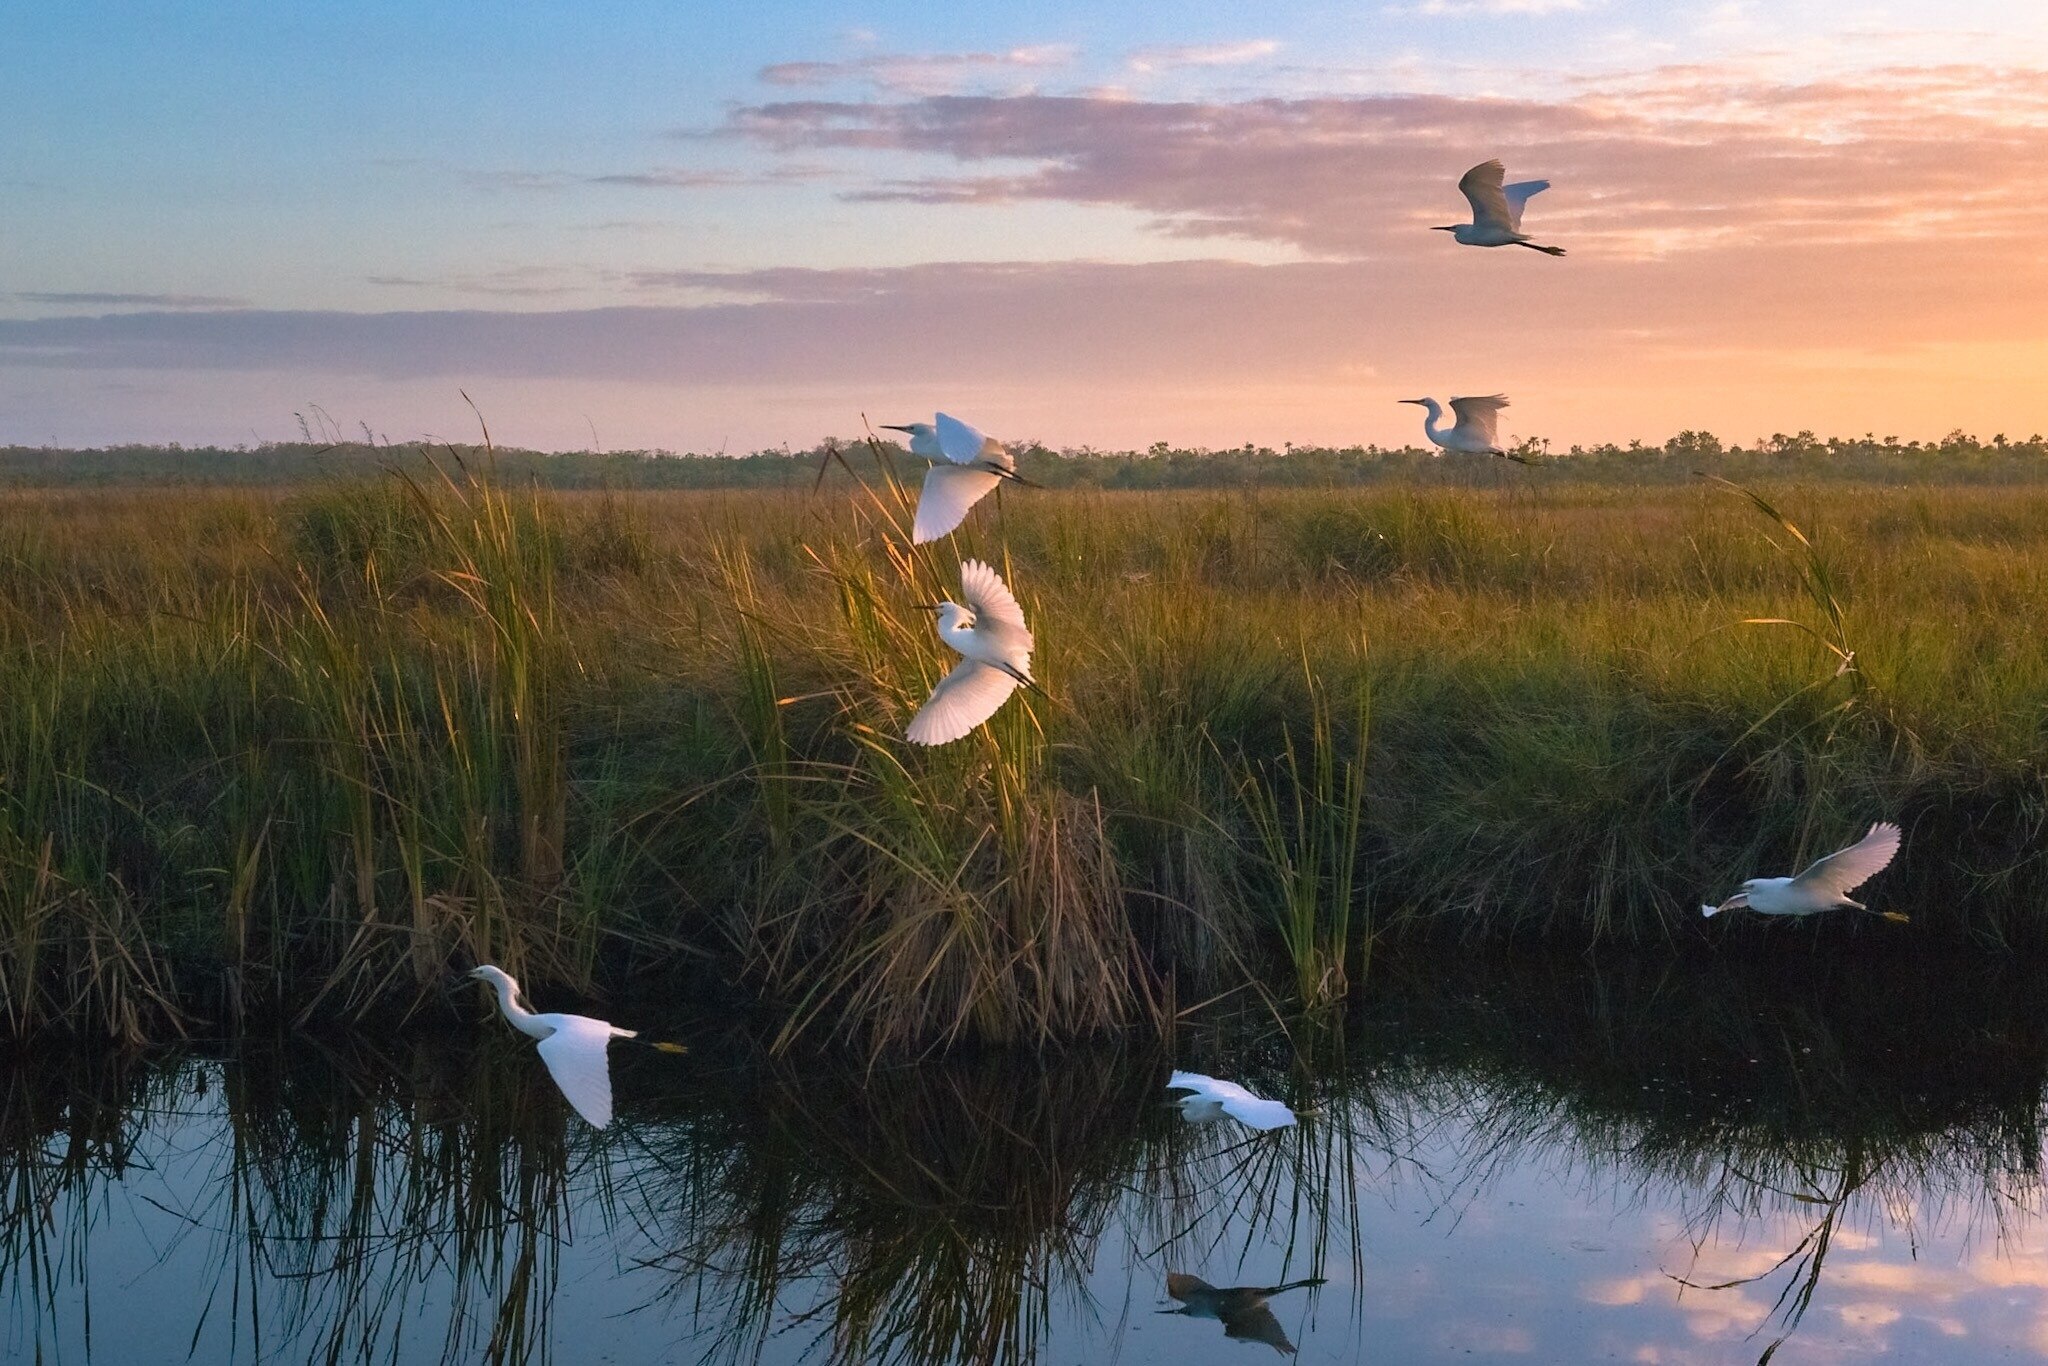 A flock of birds fly through one of the canals during sunrise in the Fakahatchee Strand. #nature #canon #birds #sunrise